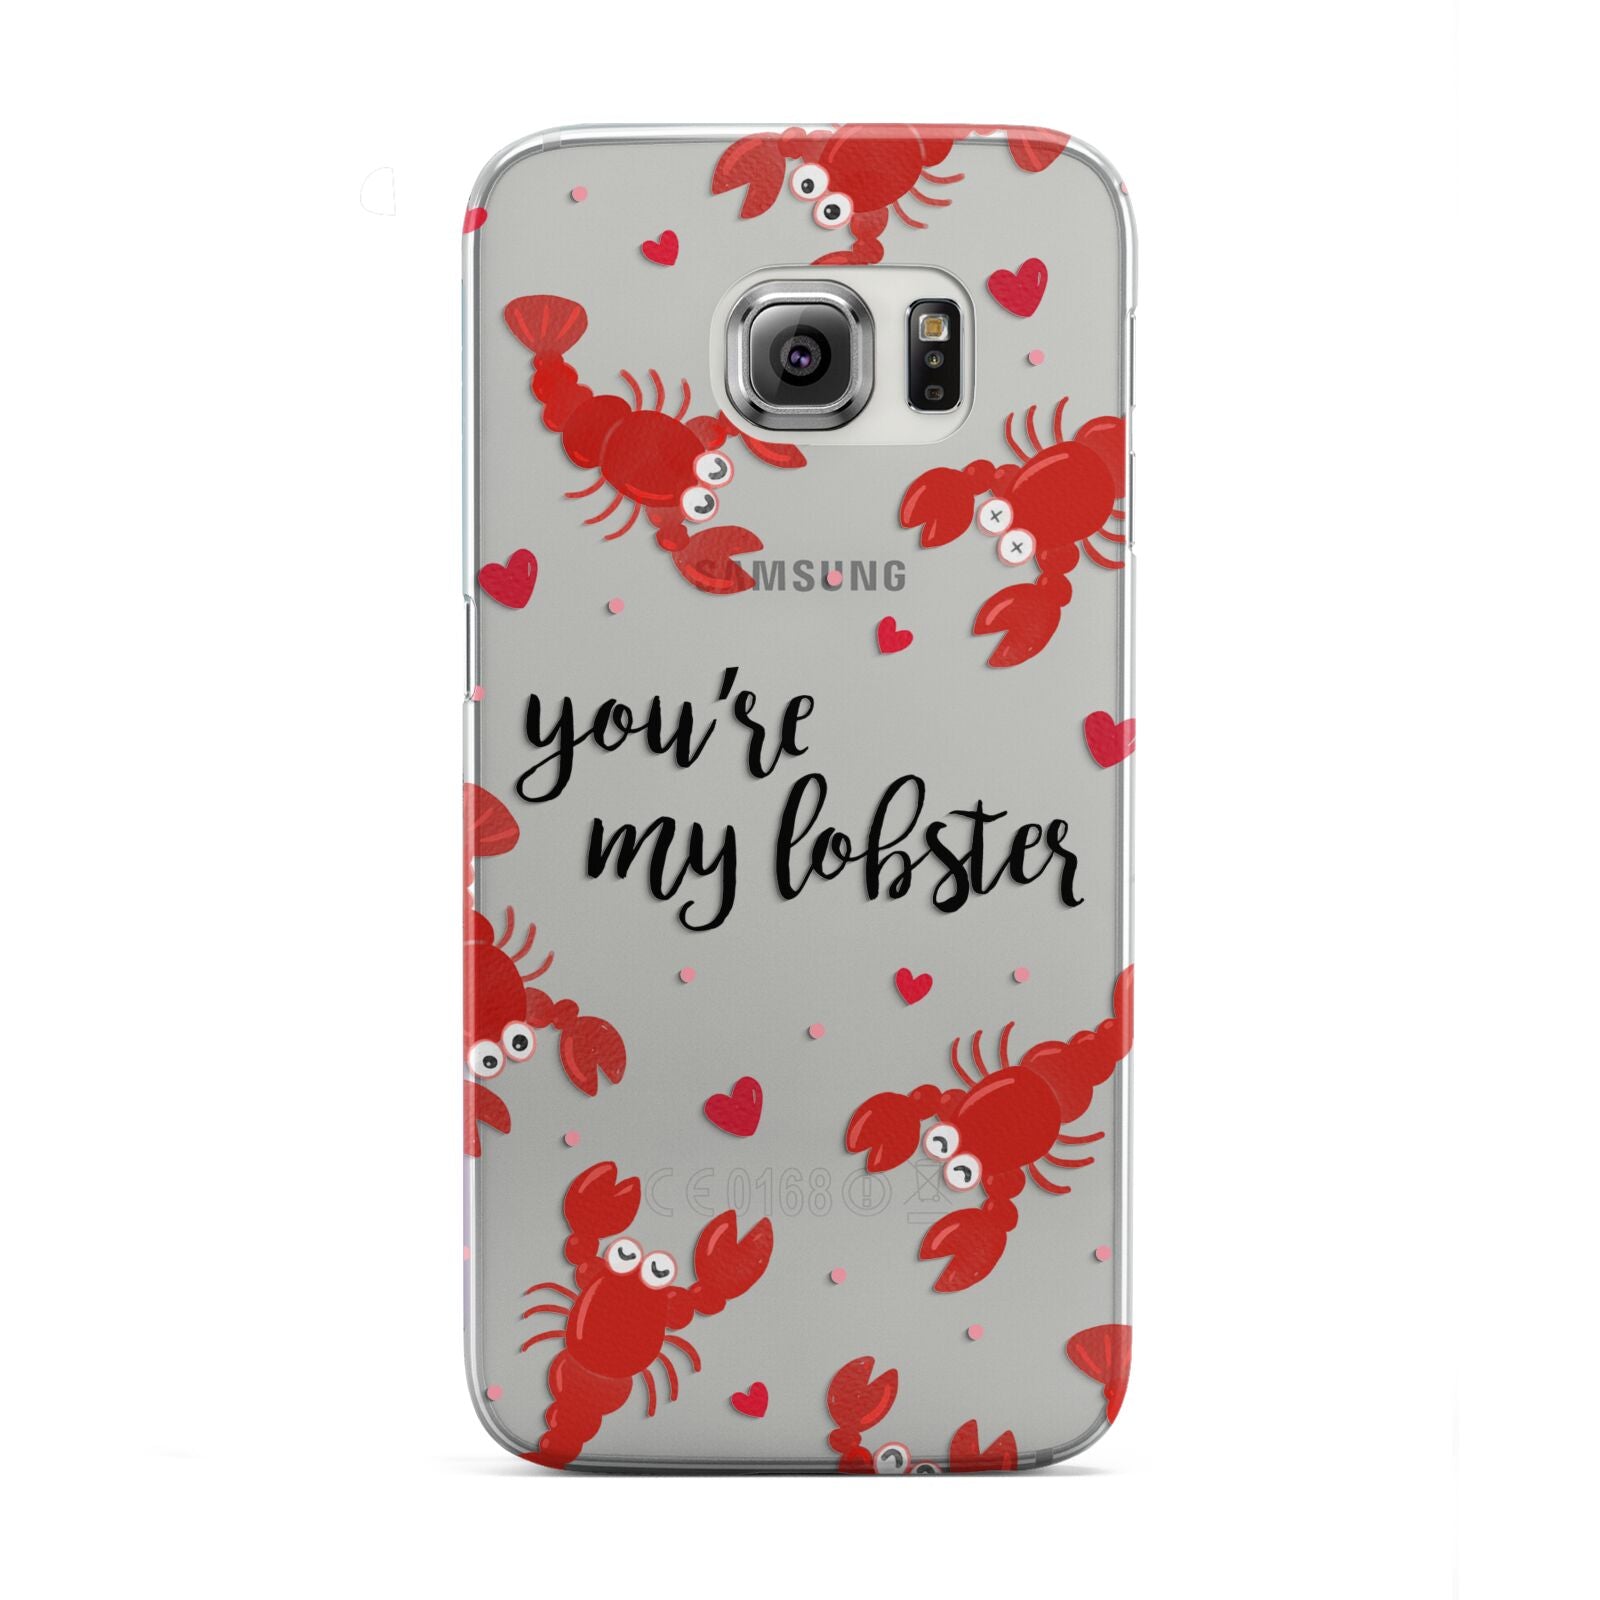 Youre My Lobster Samsung Galaxy S6 Edge Case